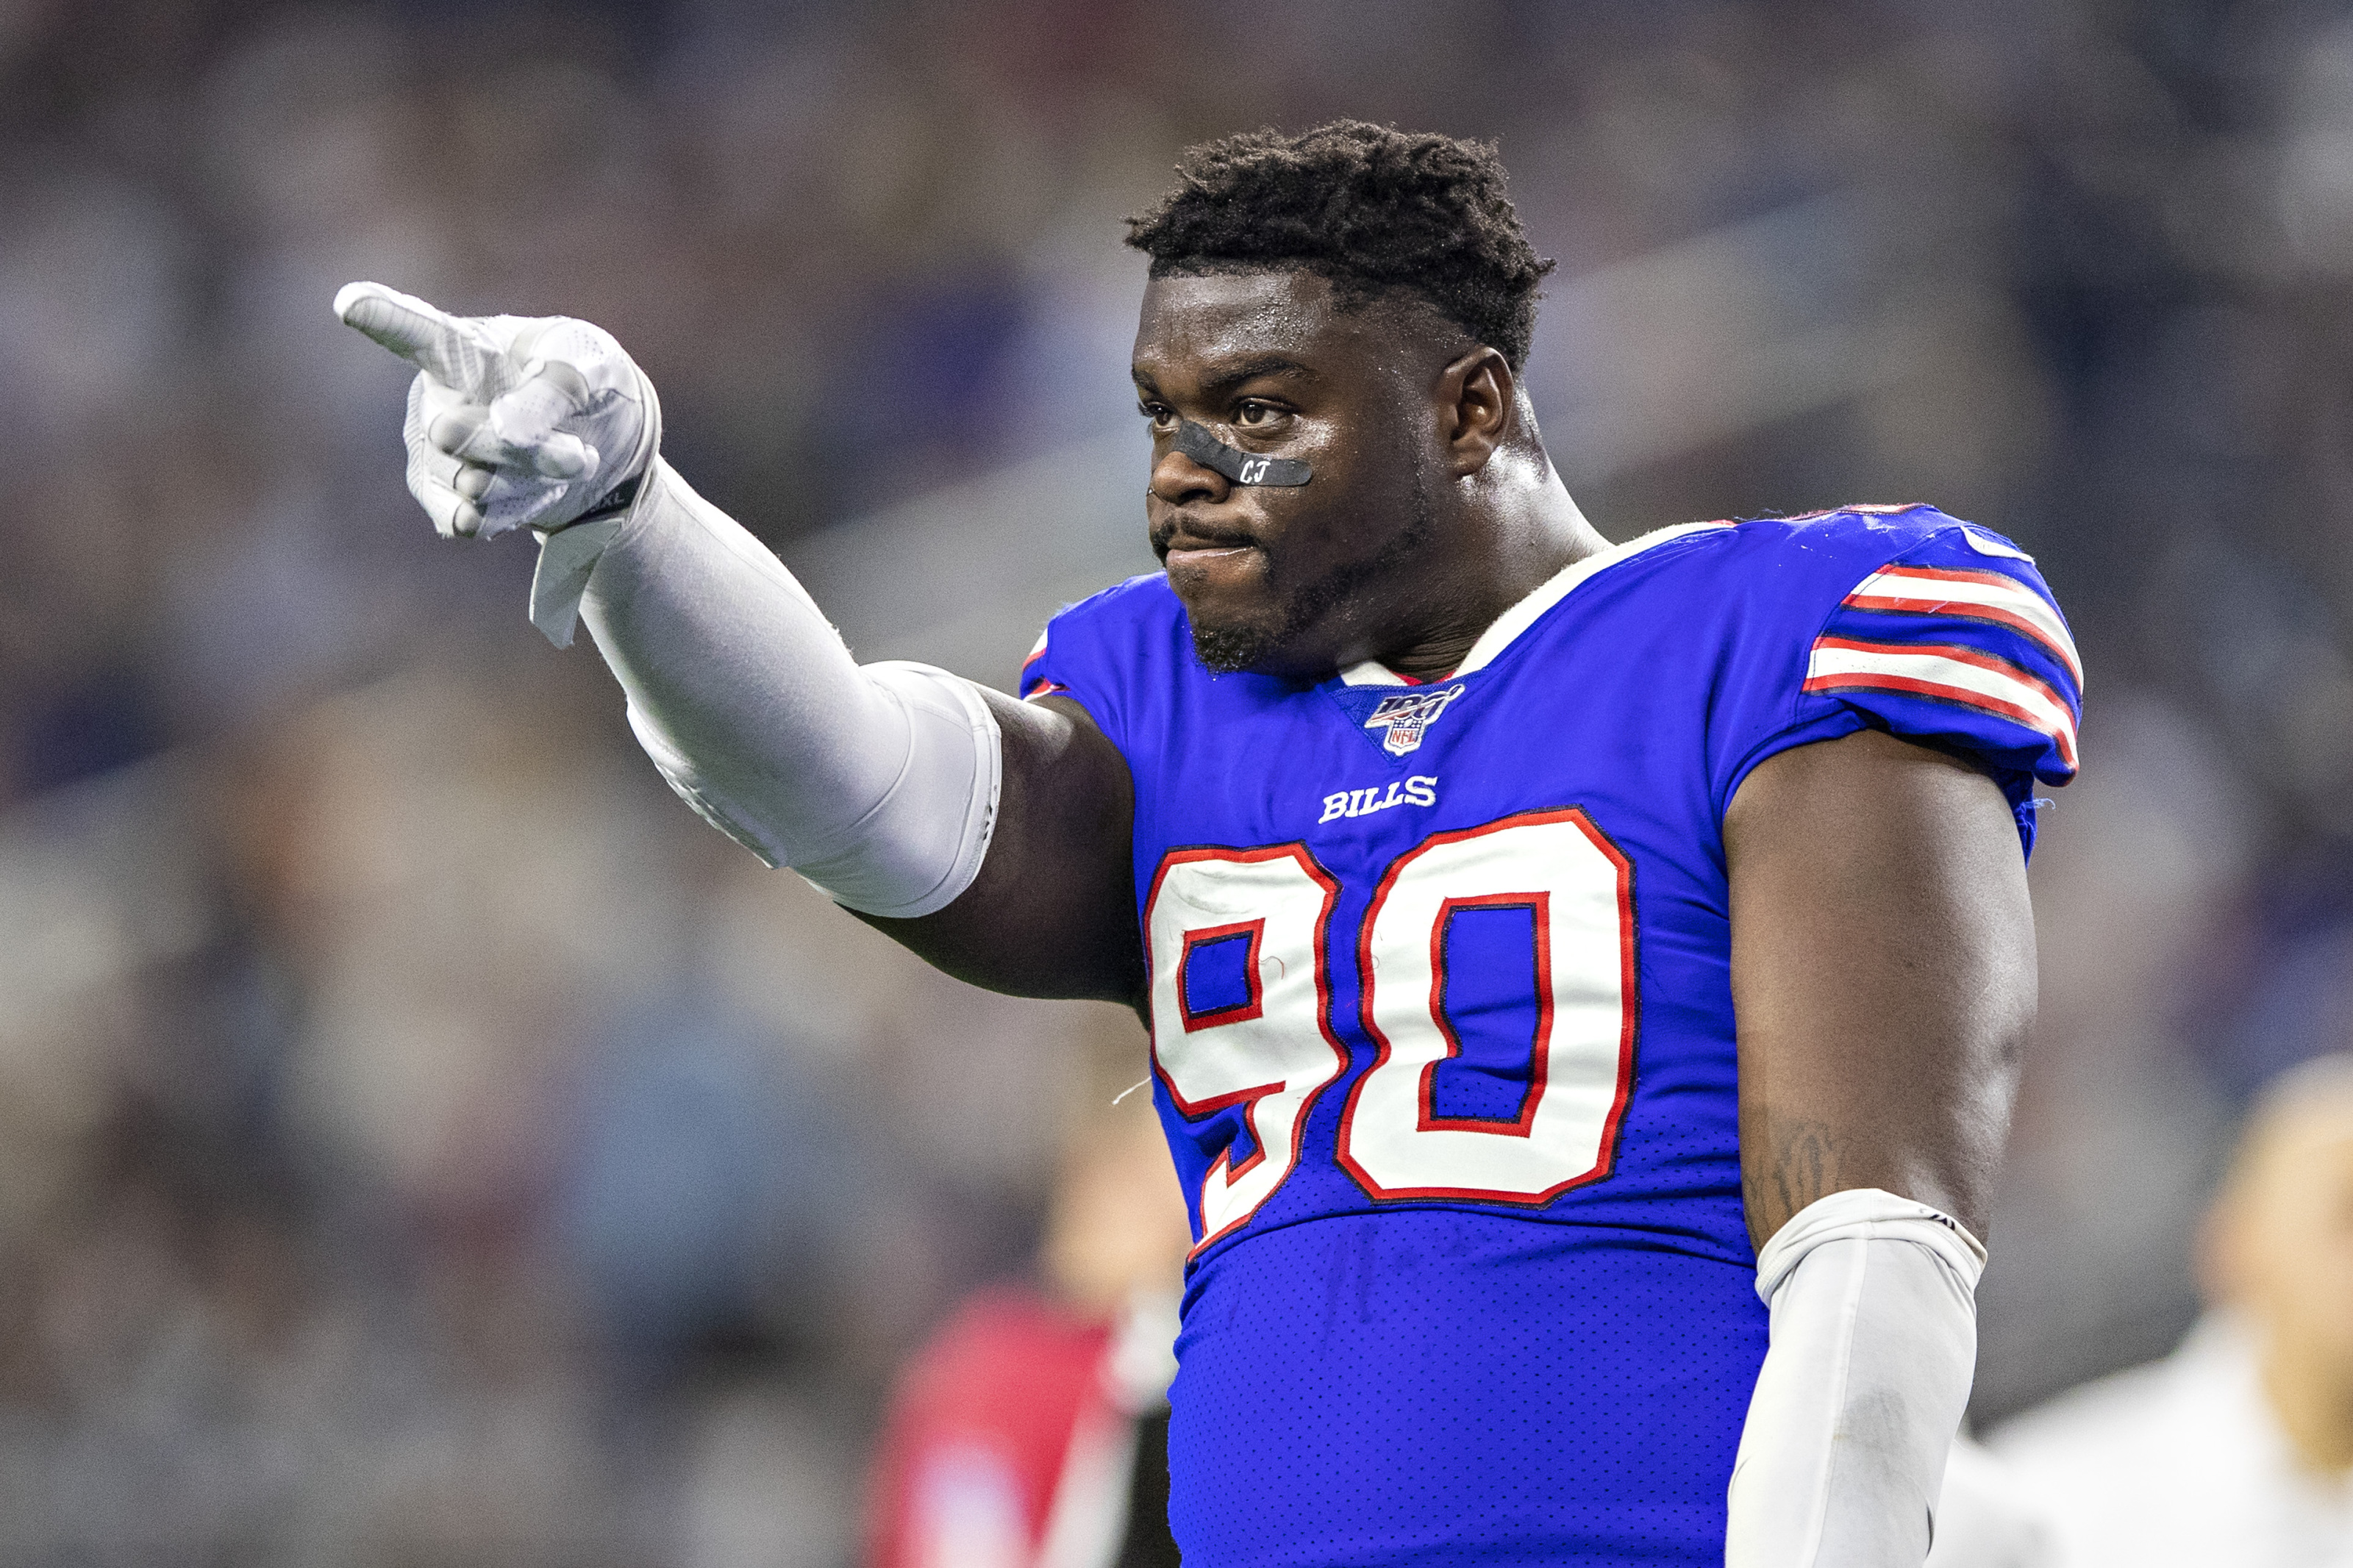 Big-time overhaul in the trenches for the Buffalo Bills